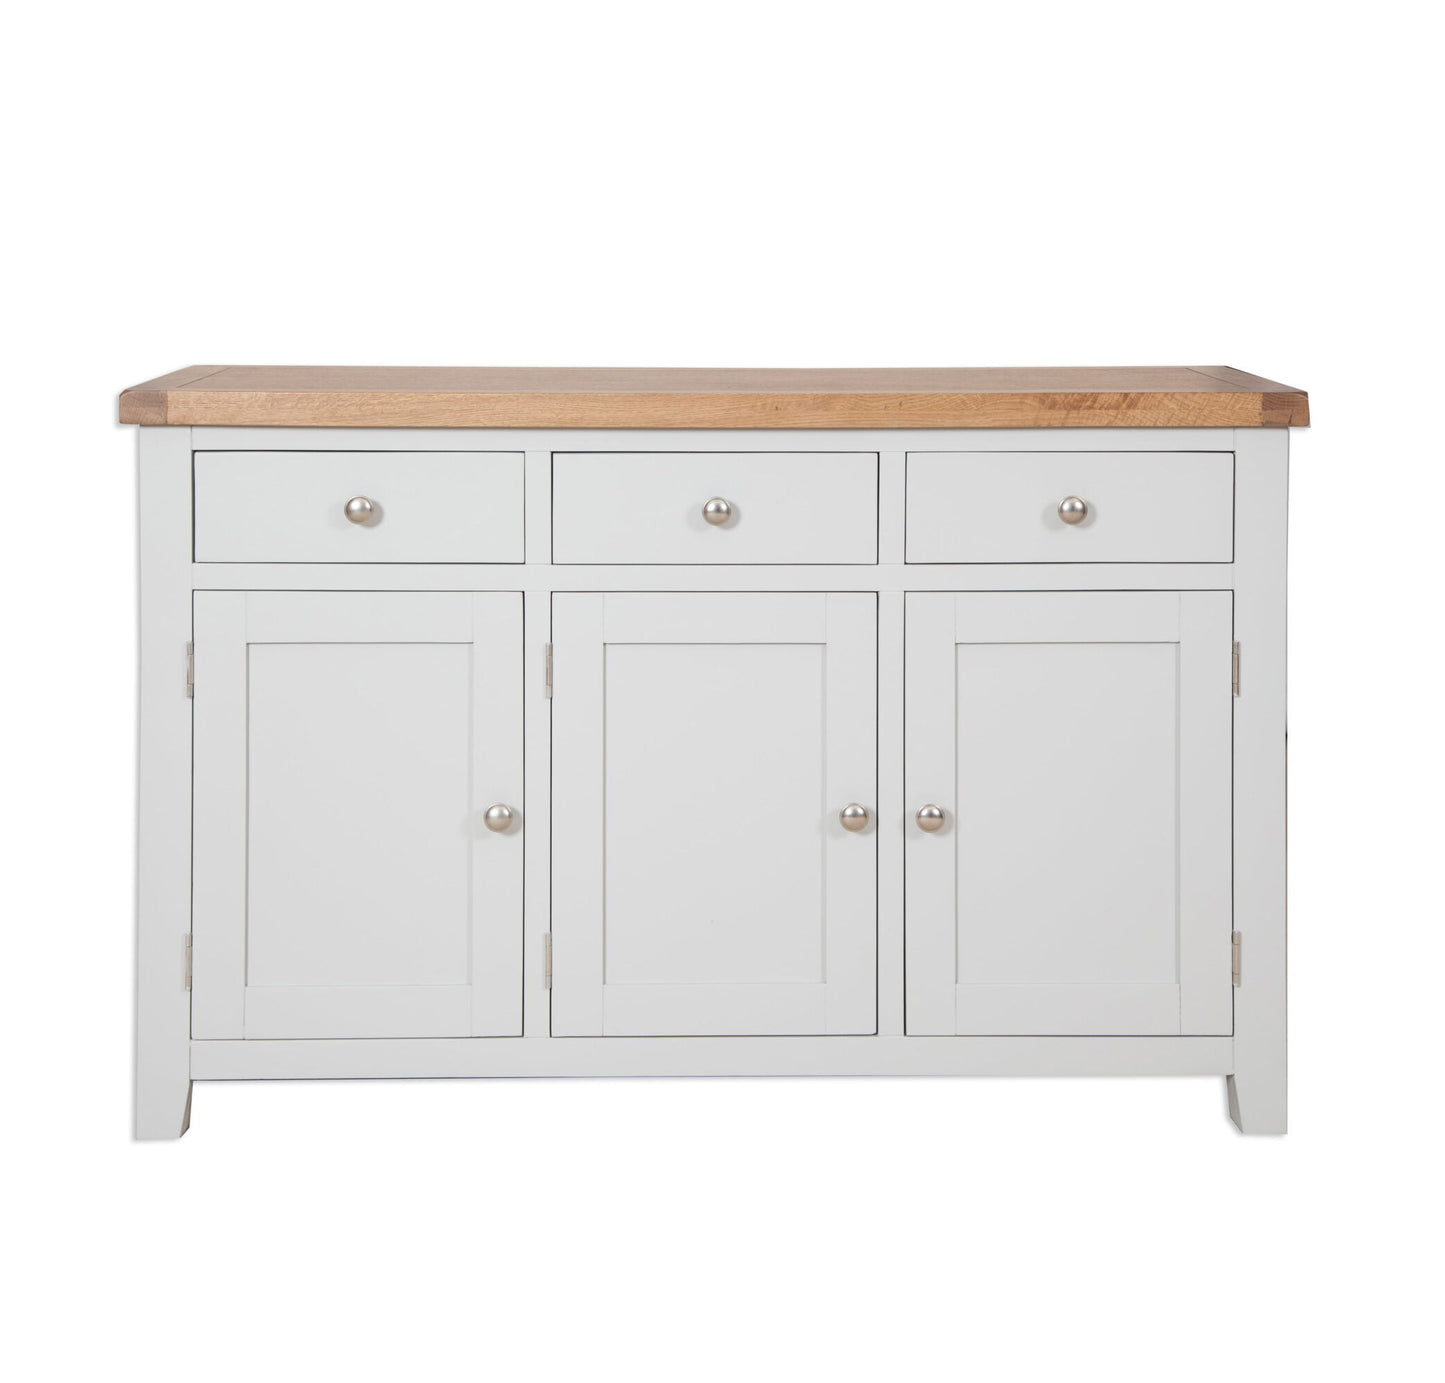 French Grey Painted Sideboard 3 Door 3 Drawer